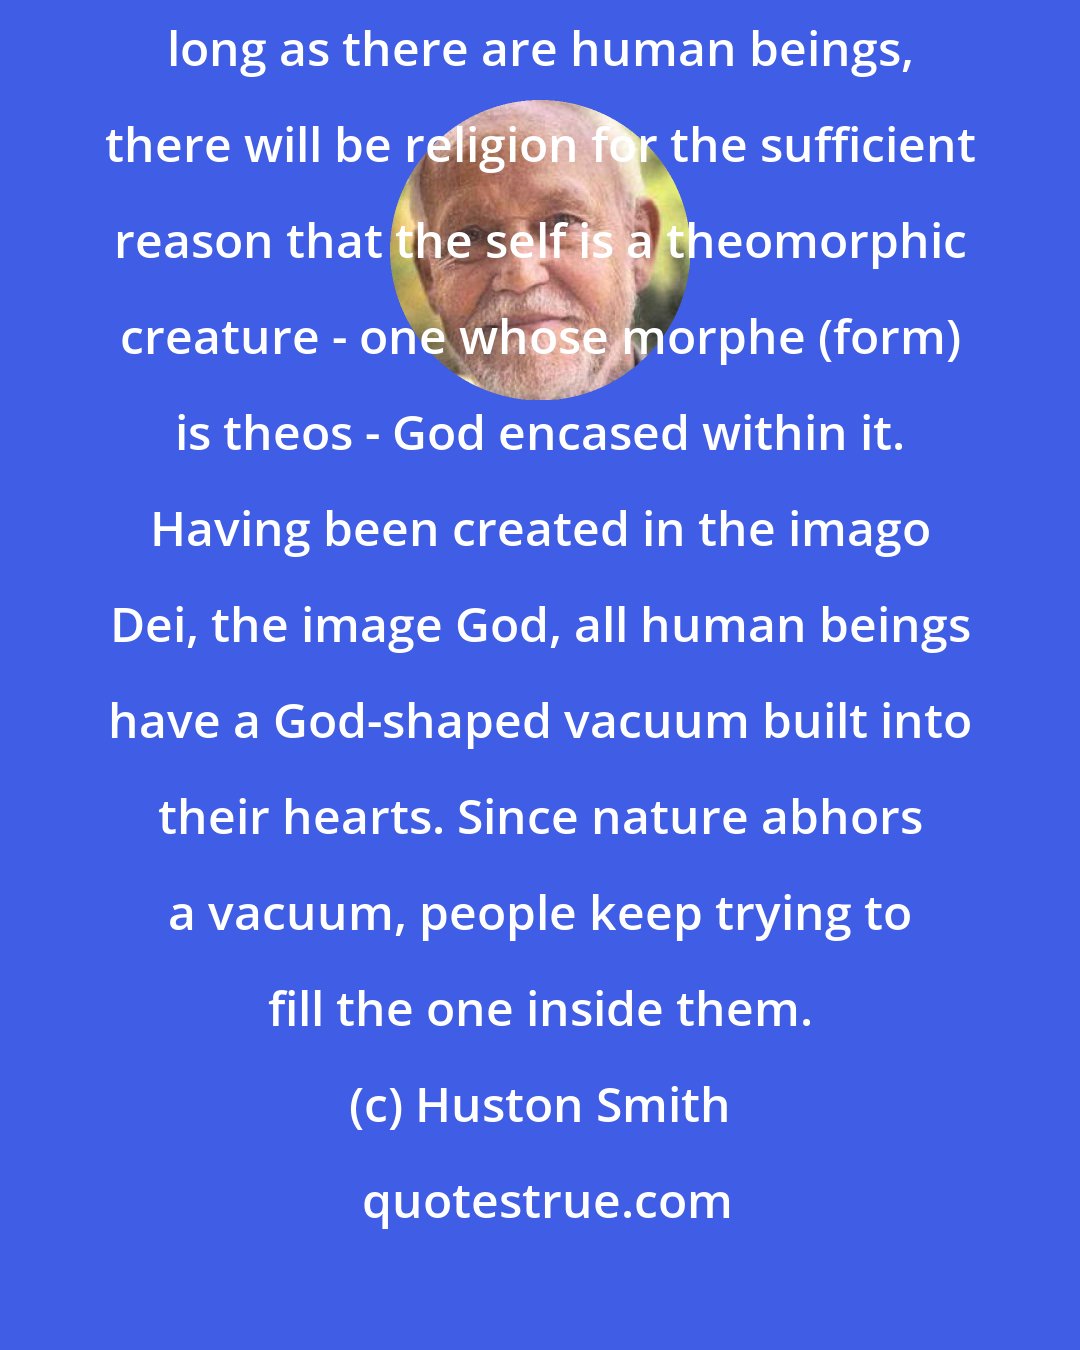 Huston Smith: Seen through the eyes of faith, religion's future is secure. As long as there are human beings, there will be religion for the sufficient reason that the self is a theomorphic creature - one whose morphe (form) is theos - God encased within it. Having been created in the imago Dei, the image God, all human beings have a God-shaped vacuum built into their hearts. Since nature abhors a vacuum, people keep trying to fill the one inside them.